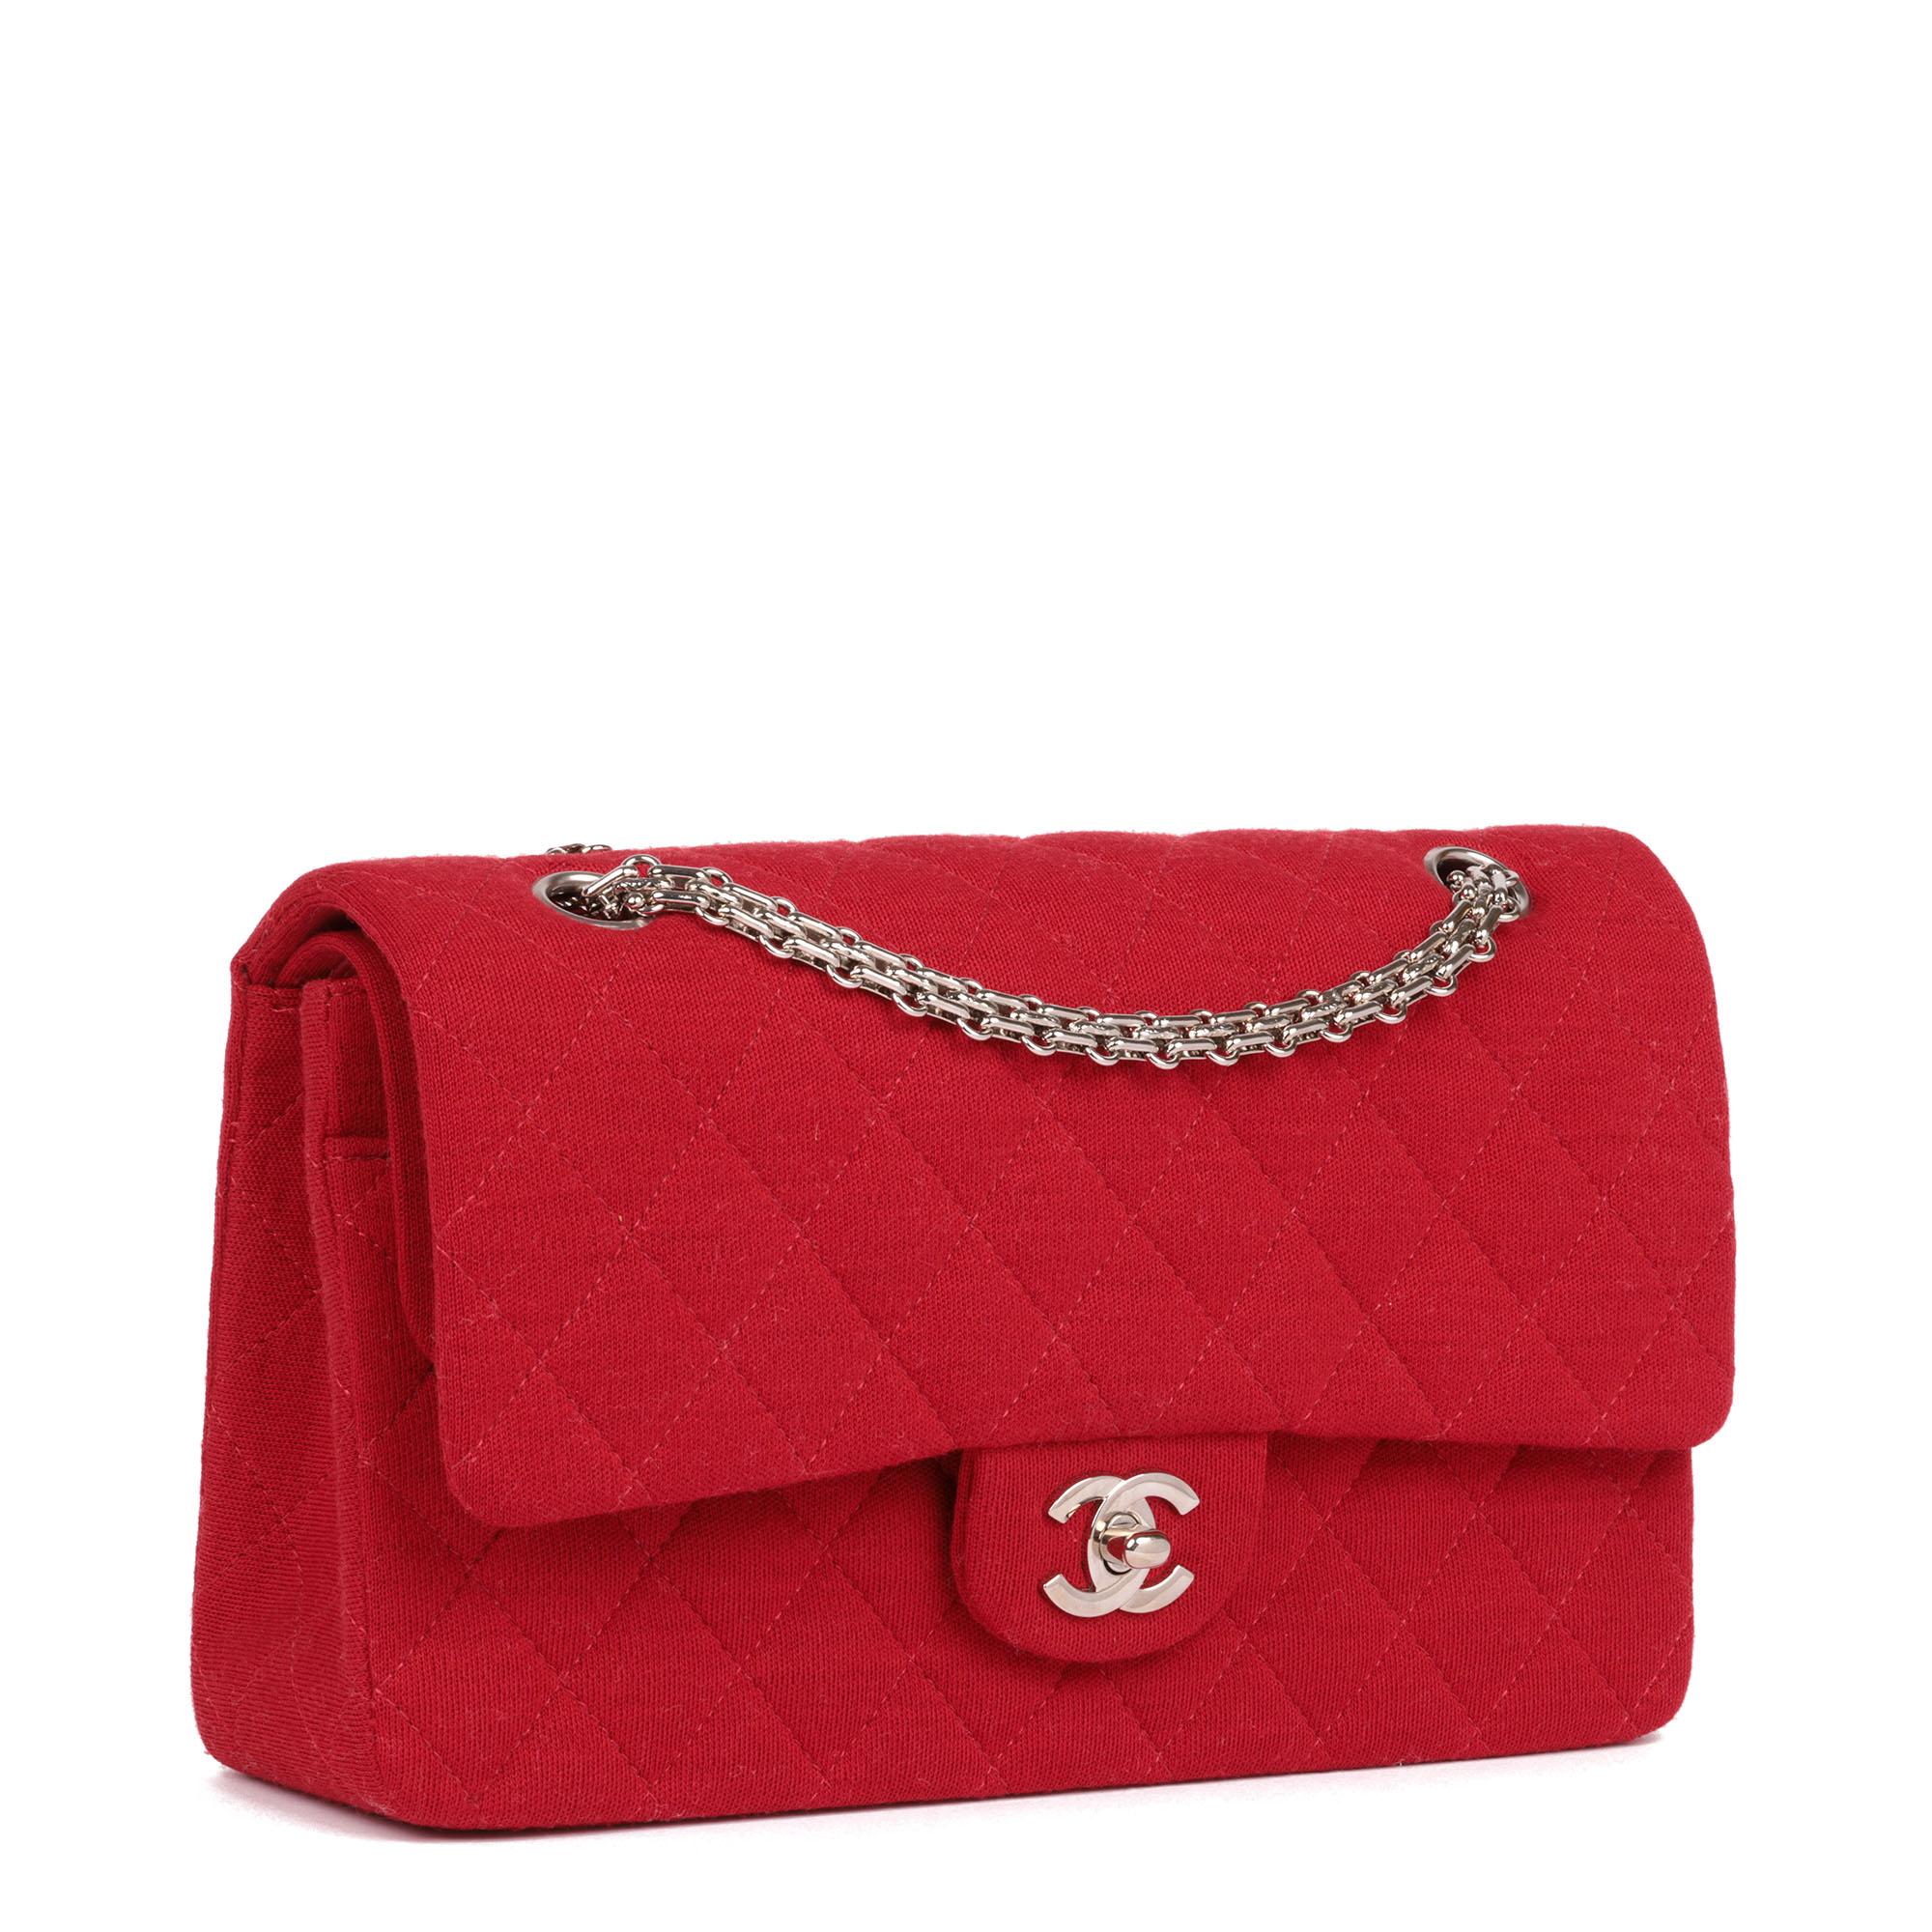 CHANEL
Red Quilted Jersey Fabric Medium Classic Double Flap Bag

Xupes Reference: CB850
Serial Number: 10742518
Age (Circa): 2005
Accompanied By: Authenticity Card
Authenticity Details: Authenticity Card, Serial Sticker (Made in France)
Gender: